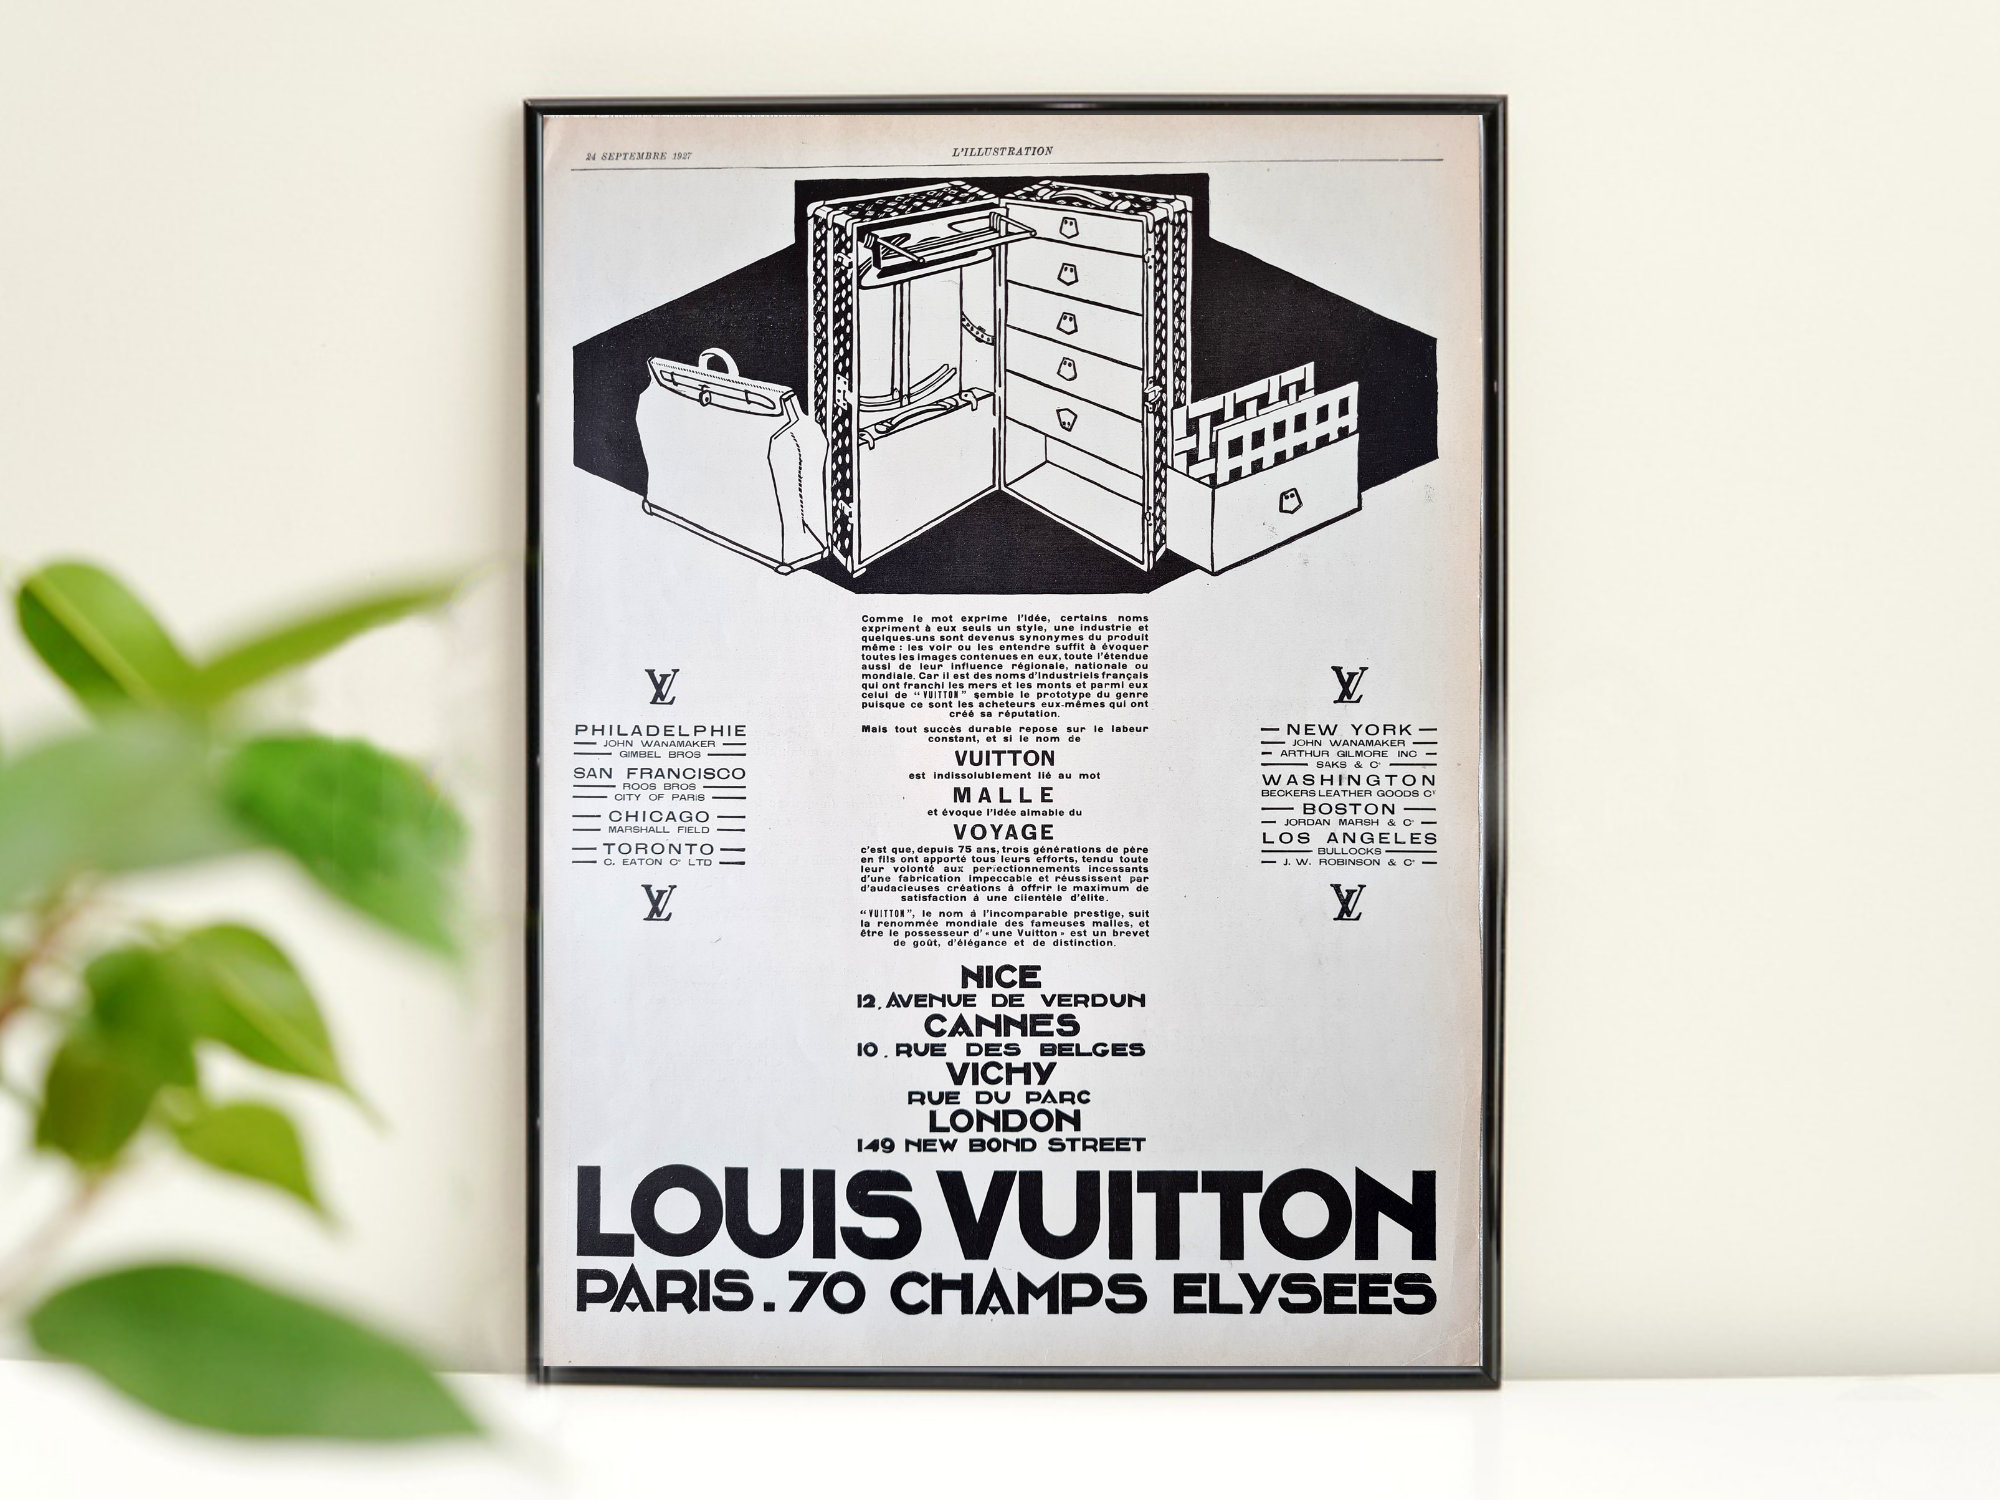 Louis Vuitton Bags and Suitcases Original Vintage Poster 1927 -  UK